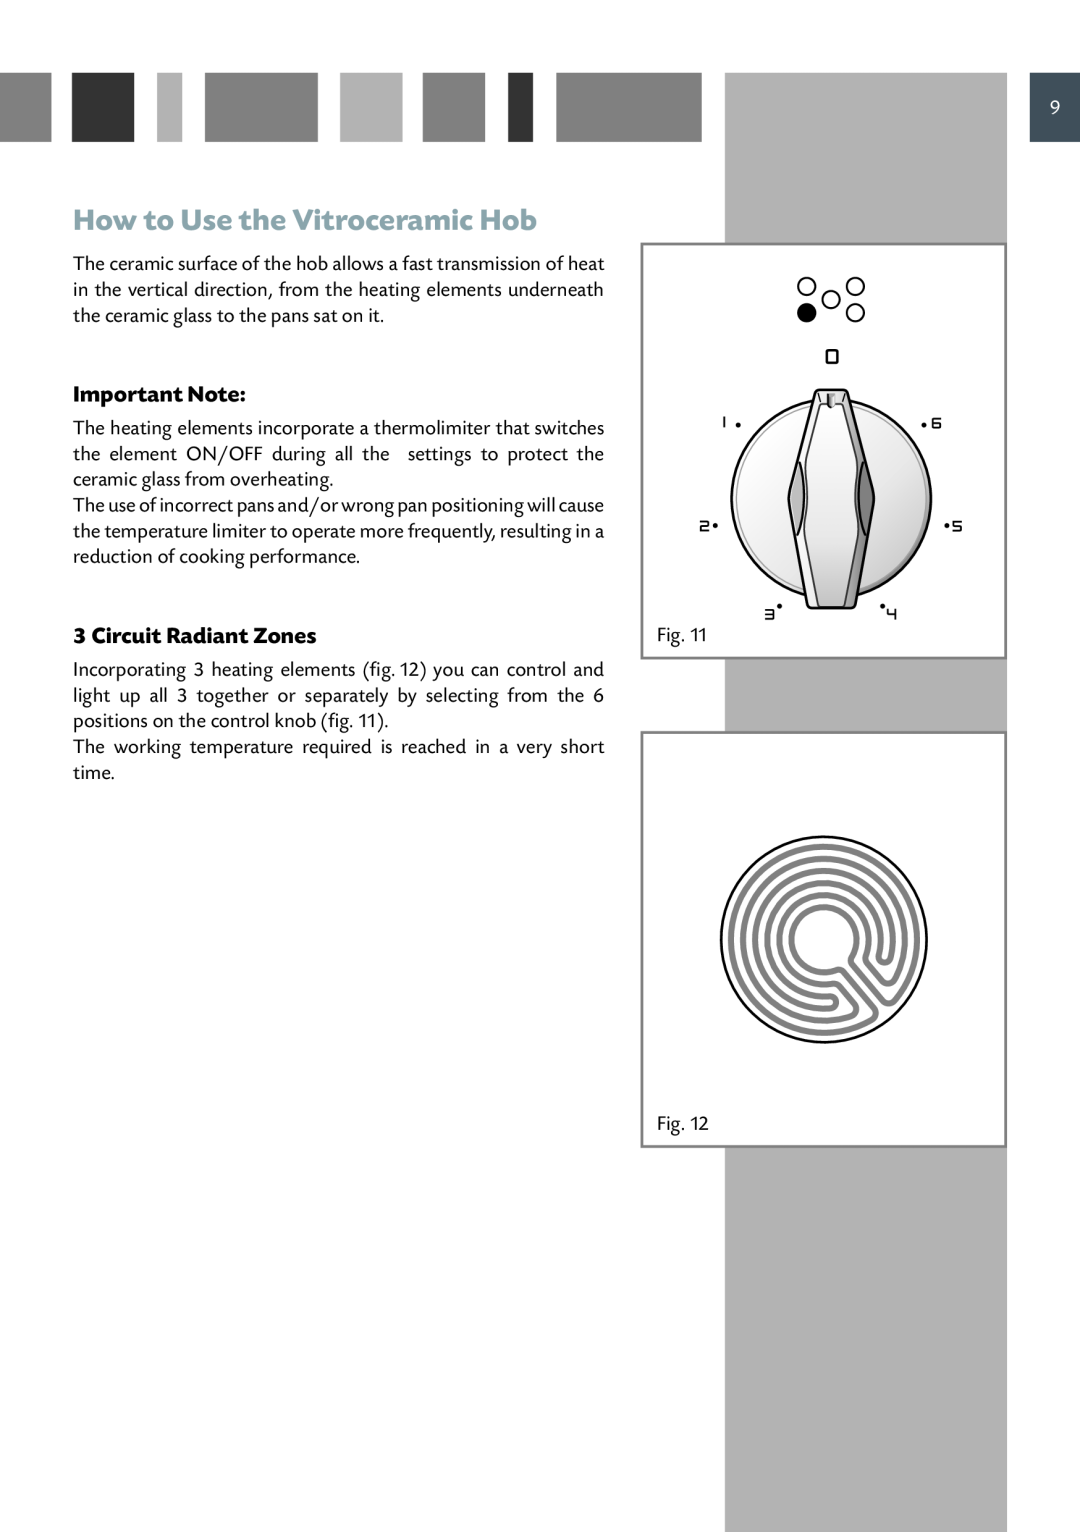 CDA RC 9620 manual How to Use the Vitroceramic Hob, Important Note, Circuit Radiant Zones 